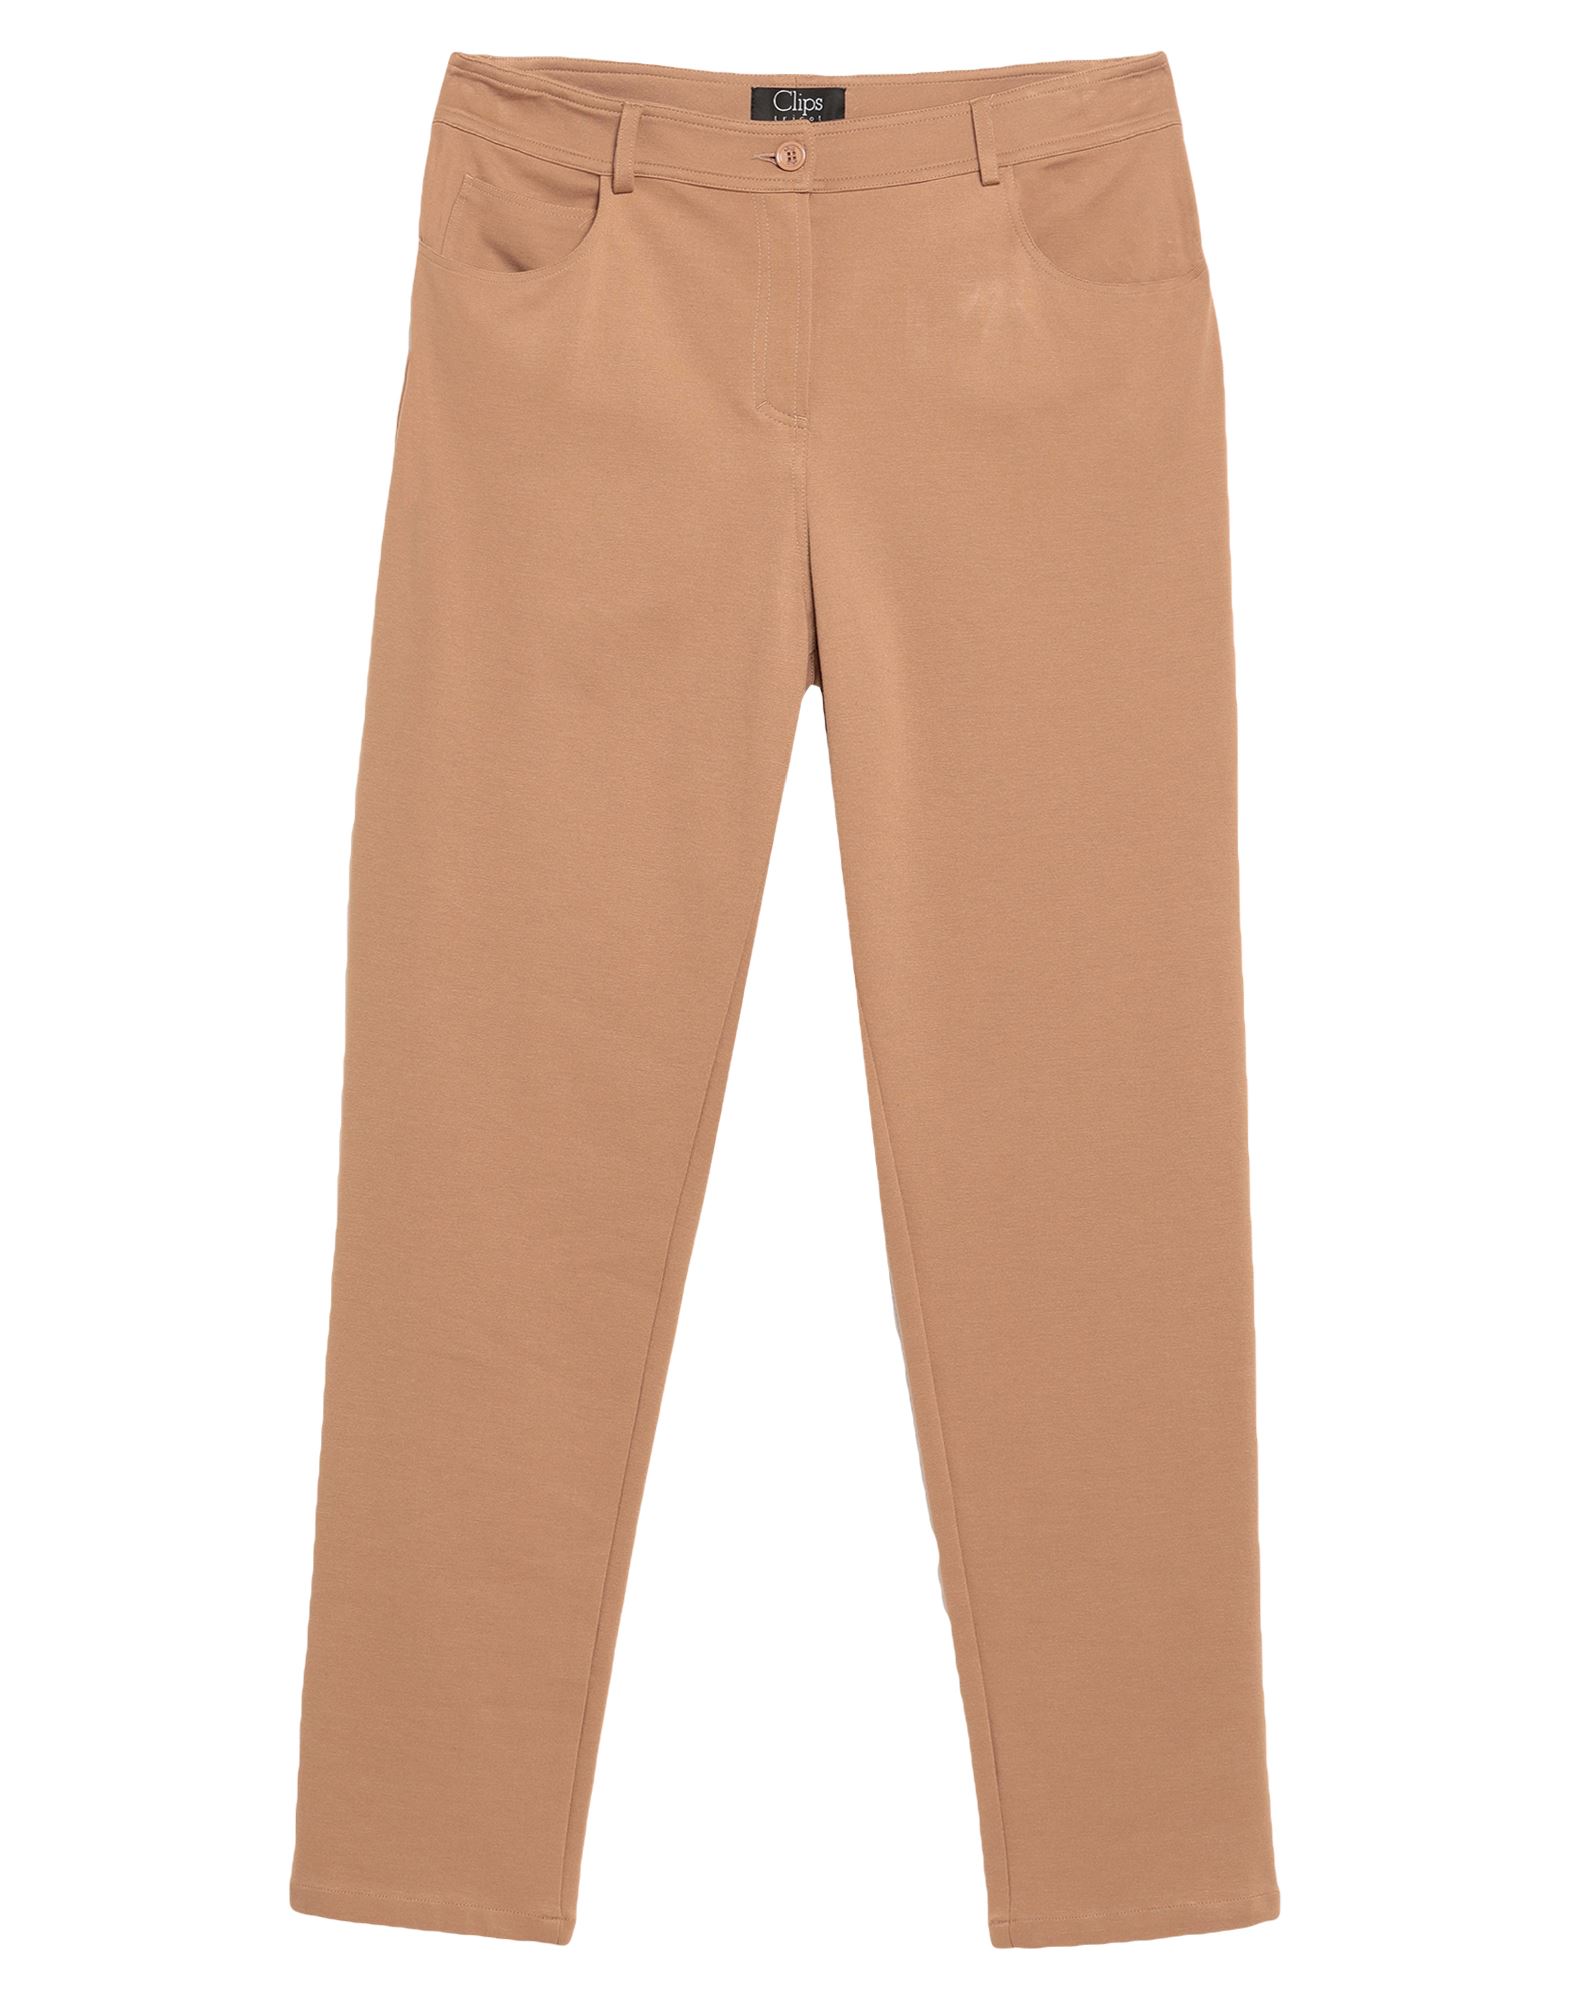 Clips Pants In Camel